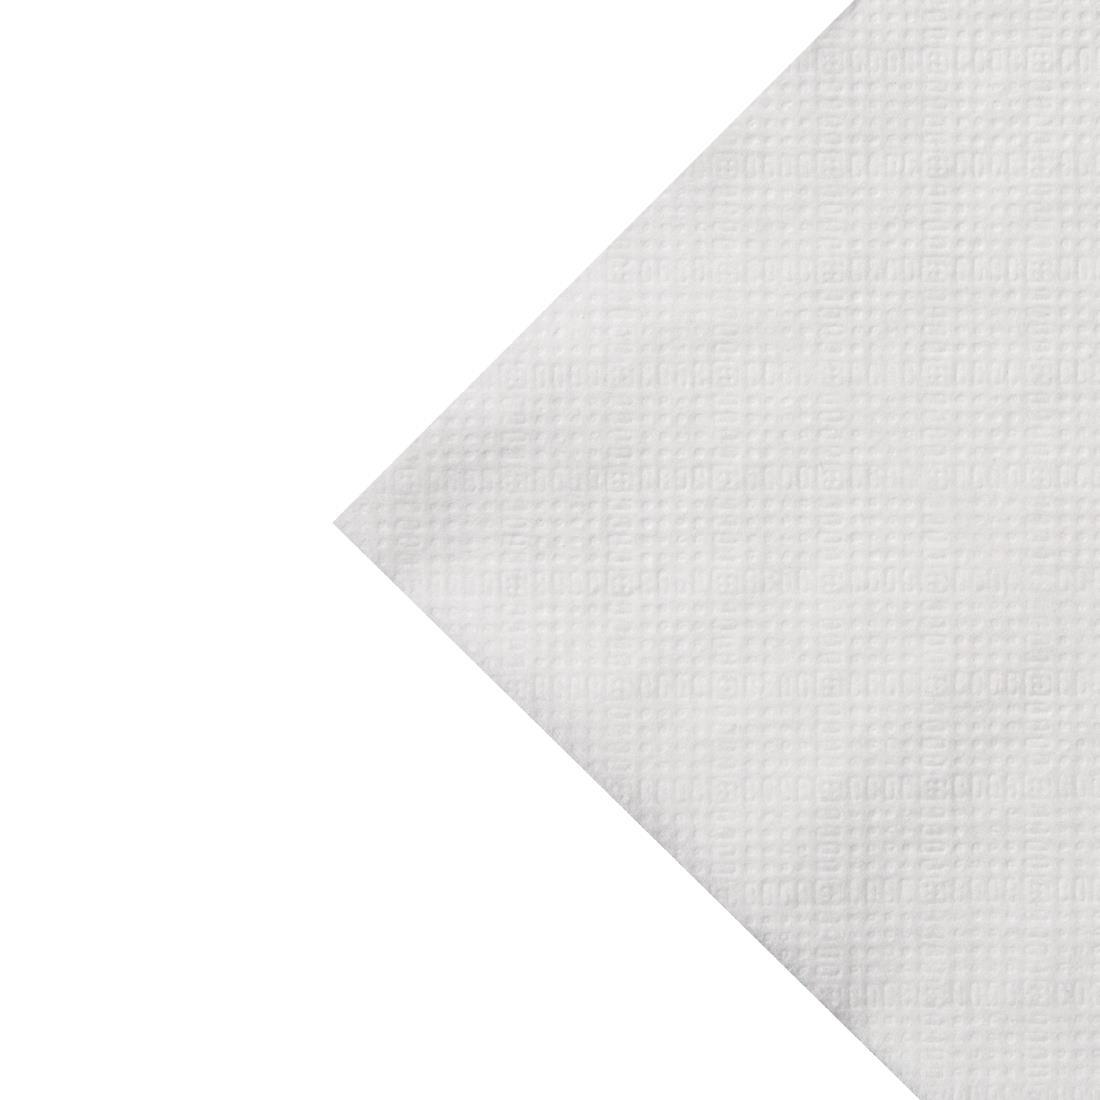 Fiesta Recyclable Cocktail Napkin White 24x24cm 1ply 1/4 Fold (Pack of 2000) - CM560  - 5